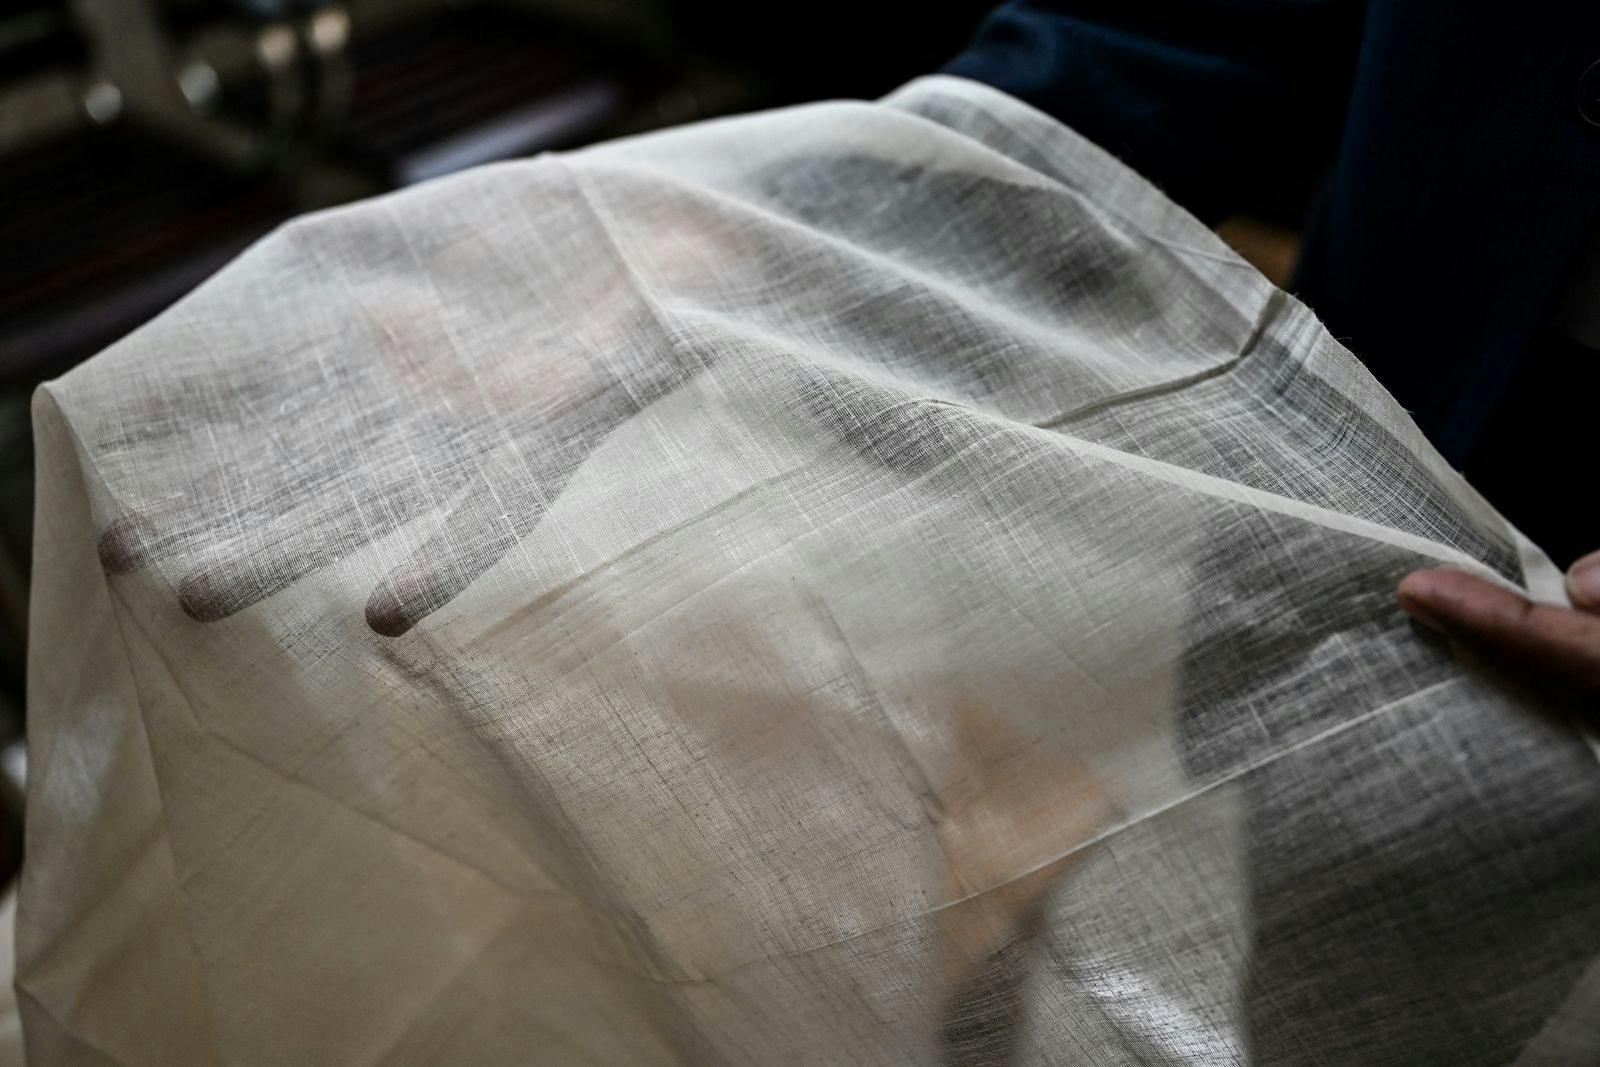 Ayub Ali, a senior government official helping shepherd the Dhaka muslin revival project, displaying a piece of muslin cloth in his office in Dhaka, January 2022 (Munir uz zaman / AFP via Getty Images)